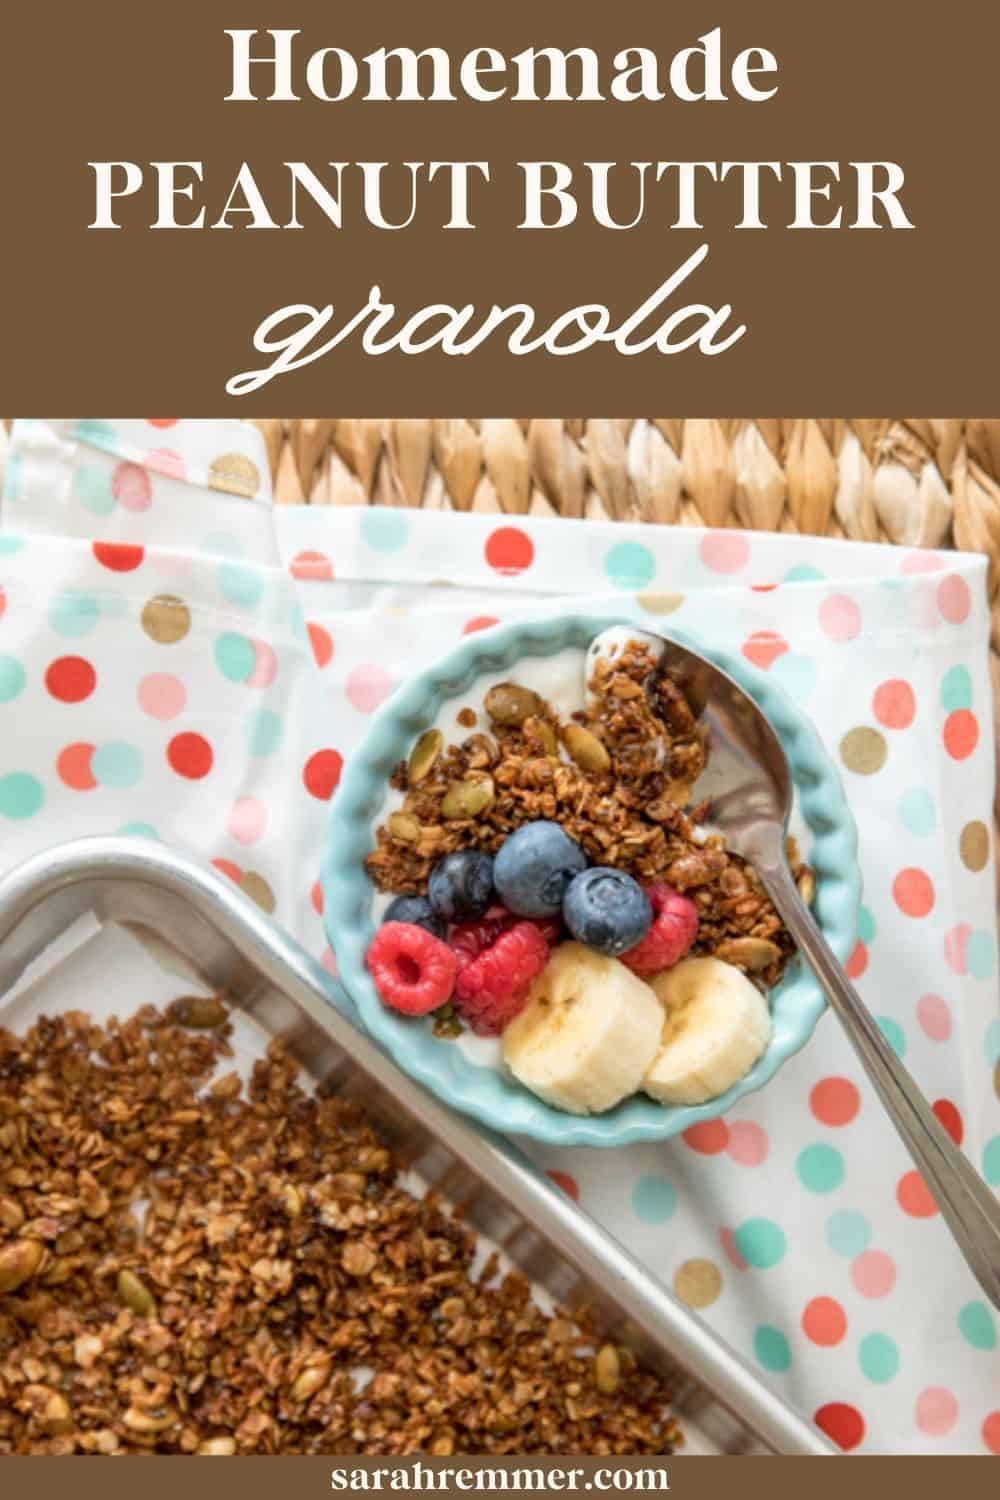 This delicious and nutritious granola is not only kid-friendly, but also SUPER easy to make! 